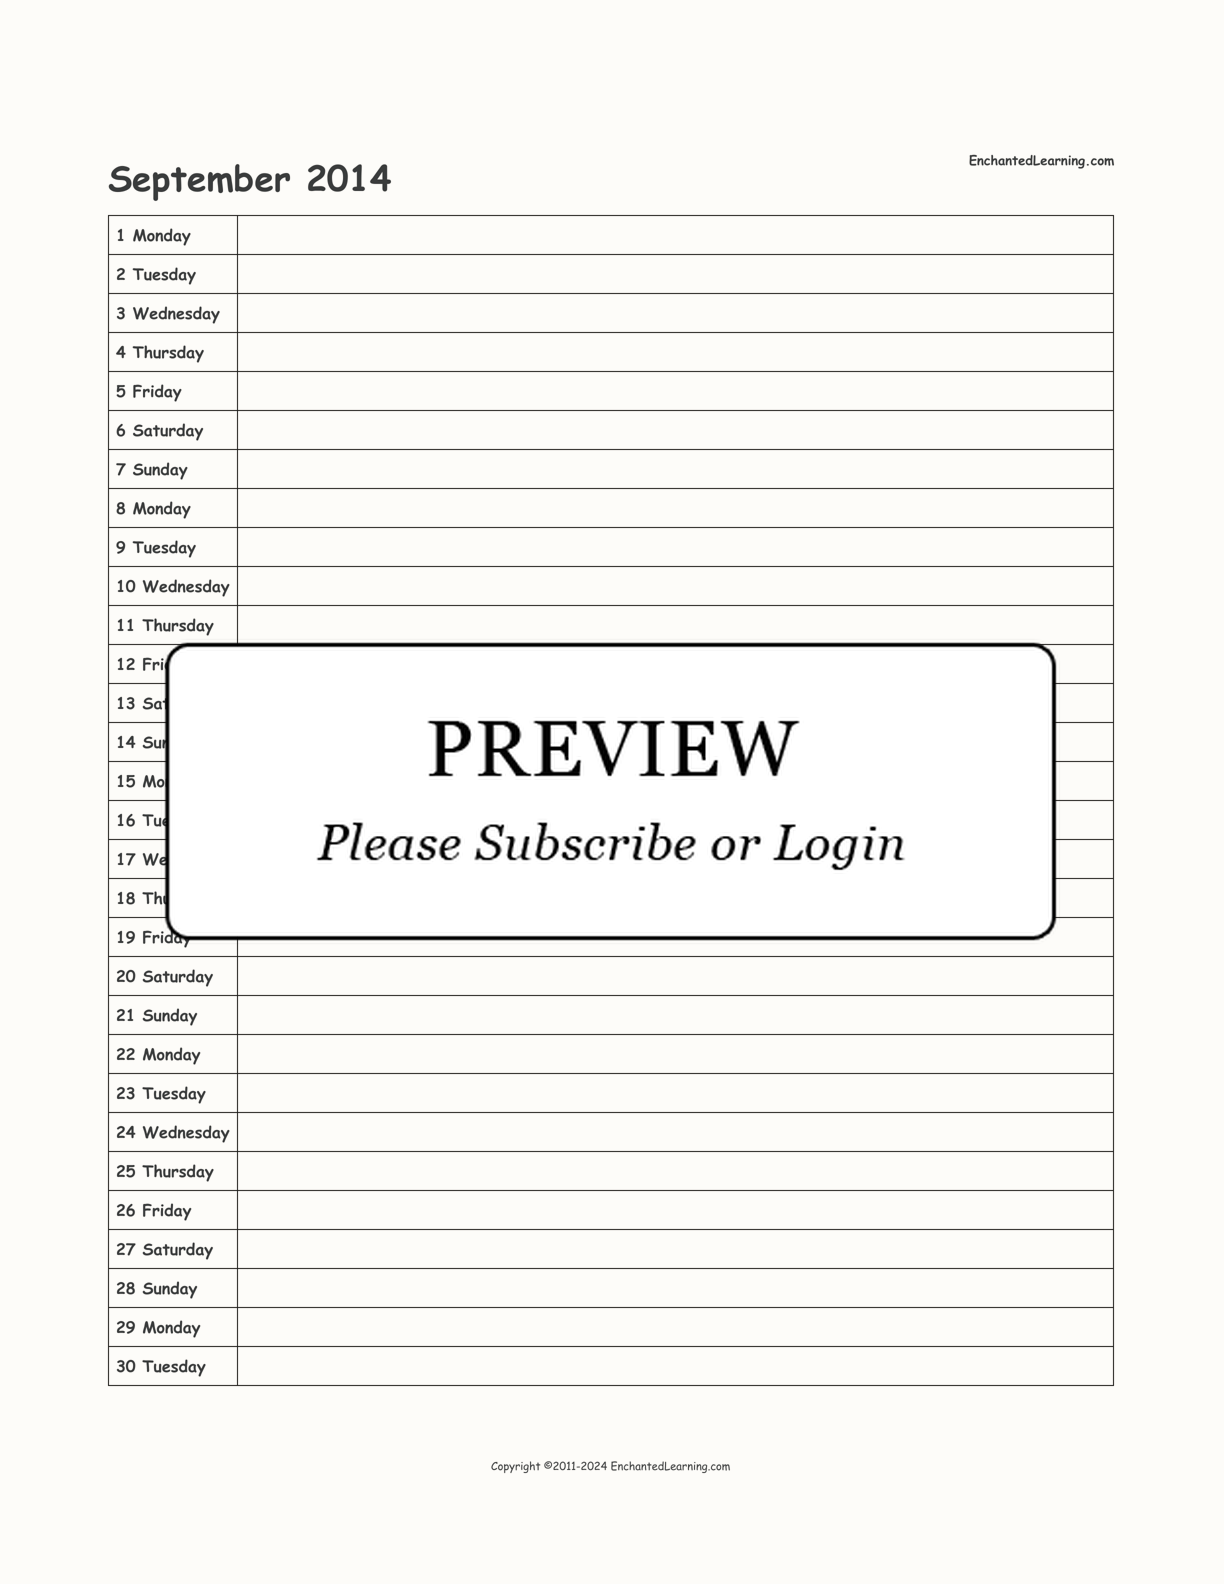 2014 Scheduling Calendar interactive printout page 9